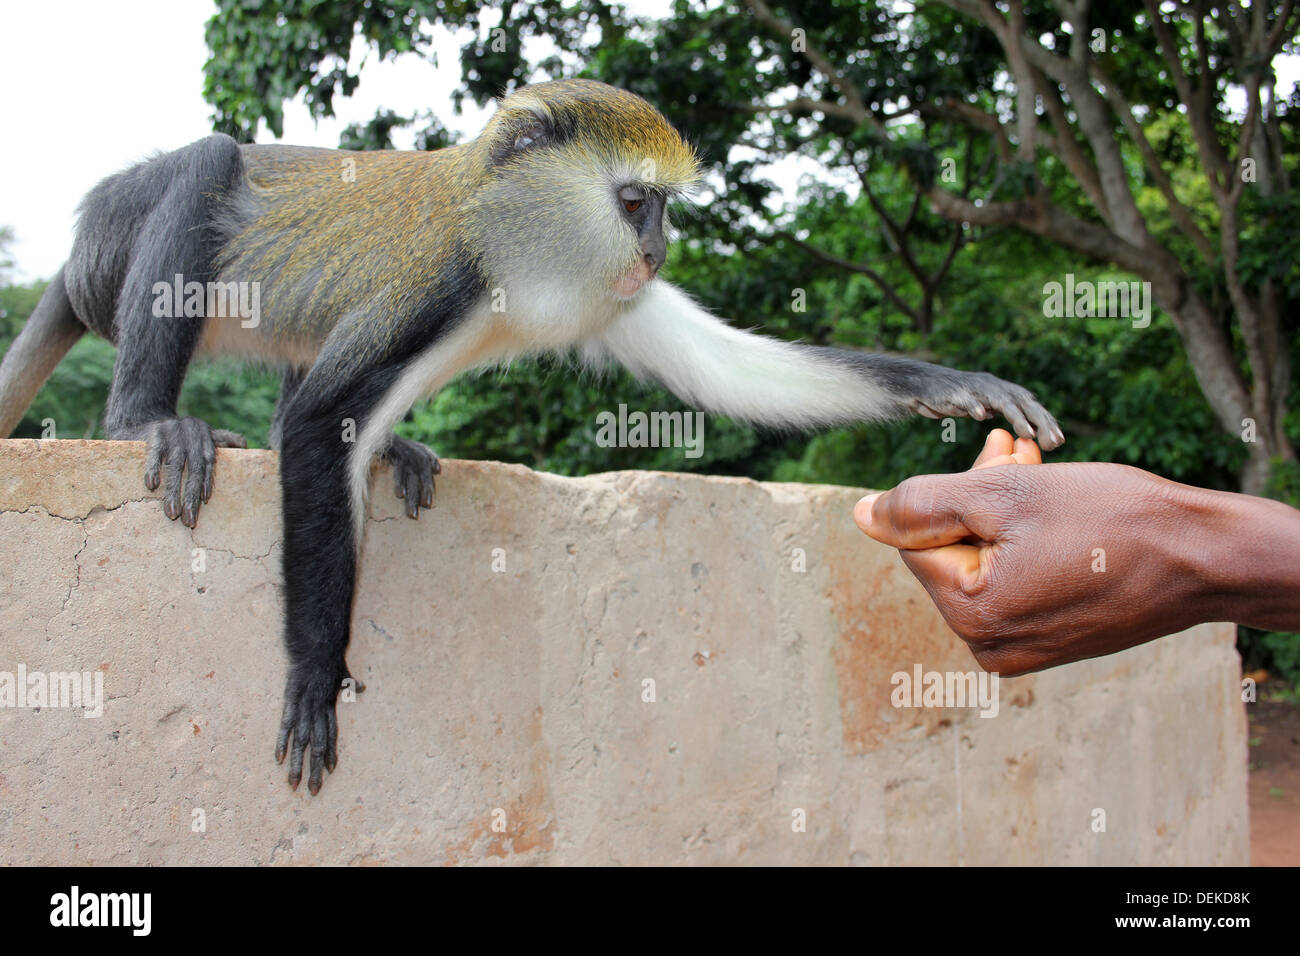 Campbell's Mona Monkey Cercopithecus campbelli Reaching To Guides Hand Stock Photo